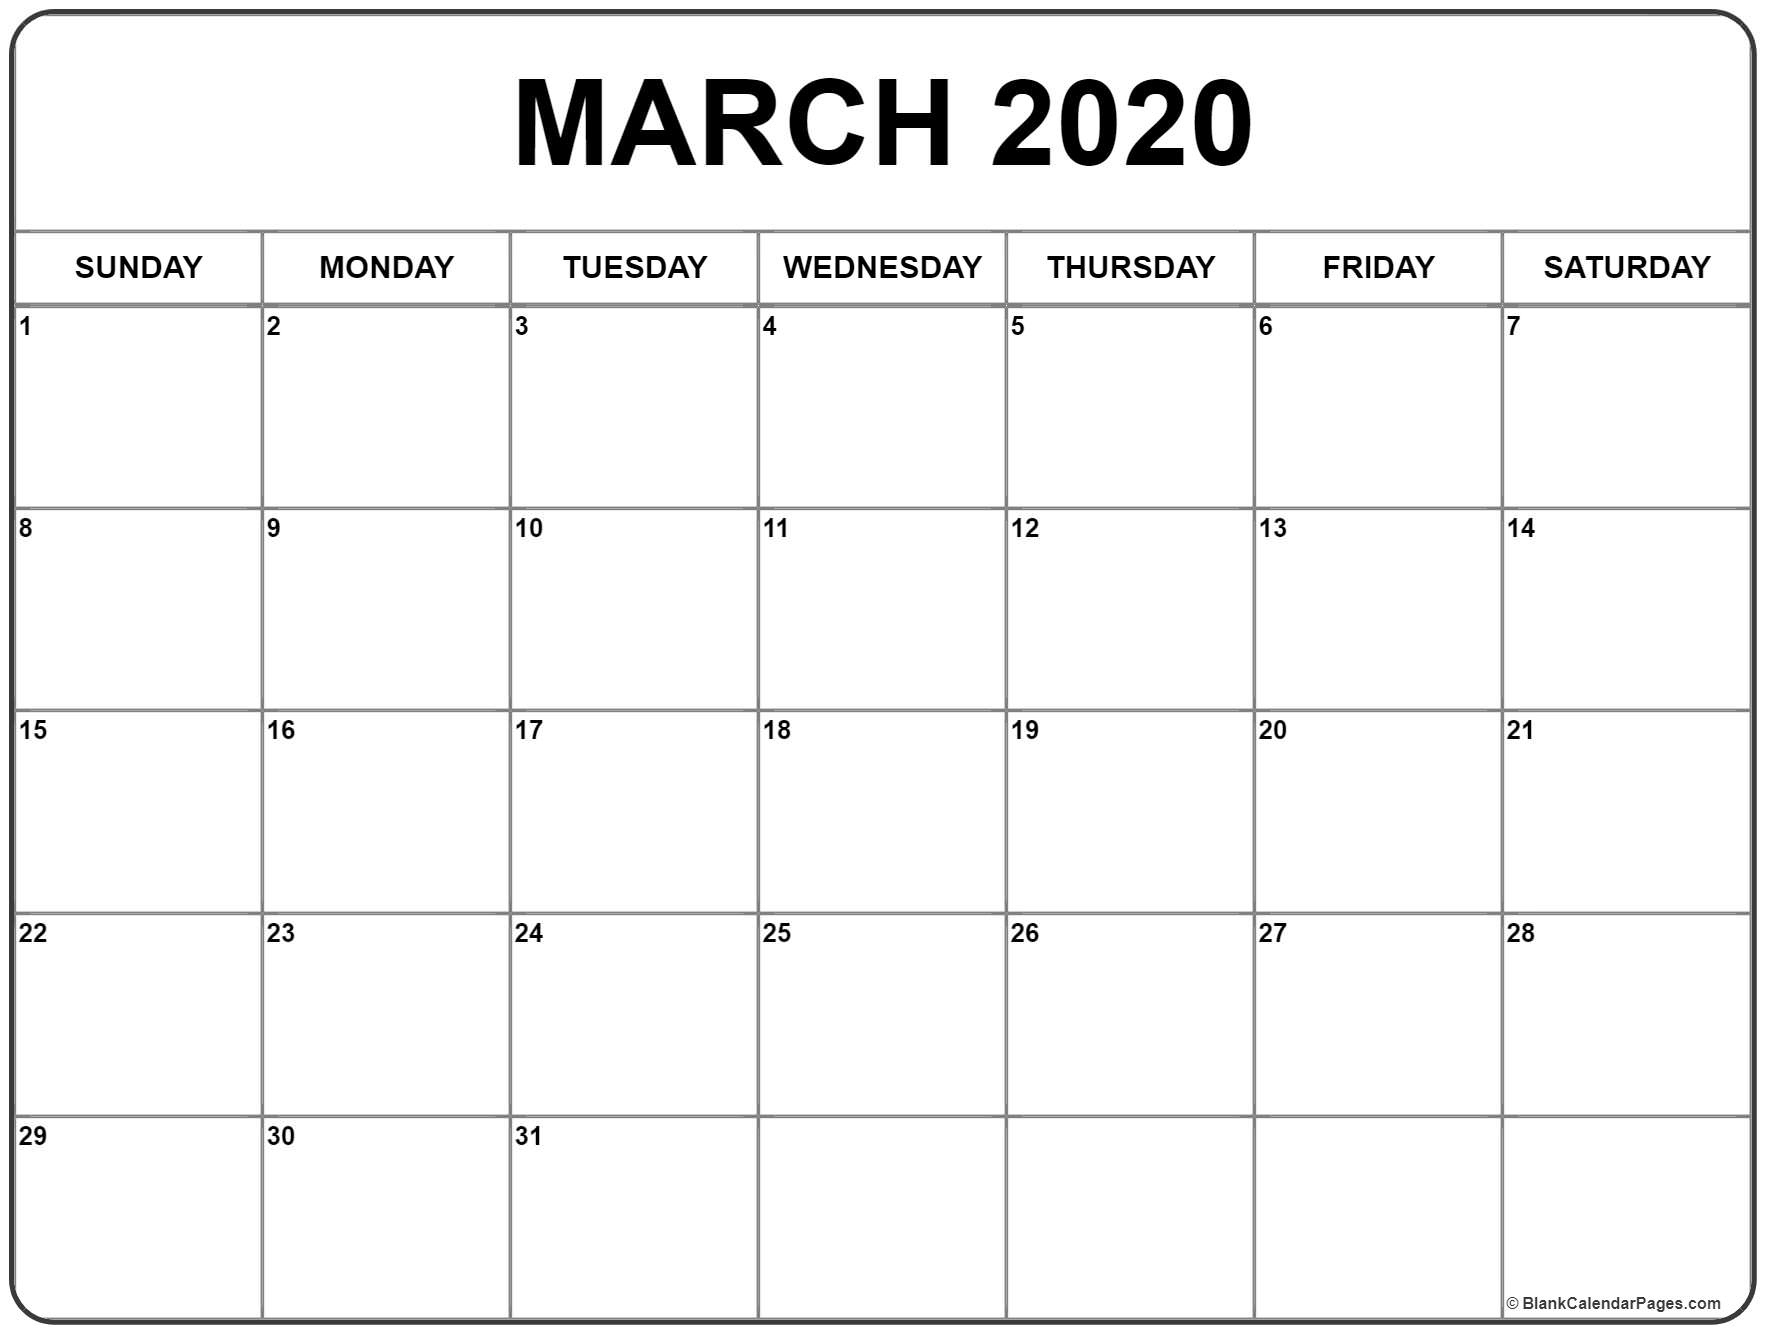 March 2020 Calendar | Free Printable Monthly Calendars Extraordinary March 2020 Calendar Canada Printable